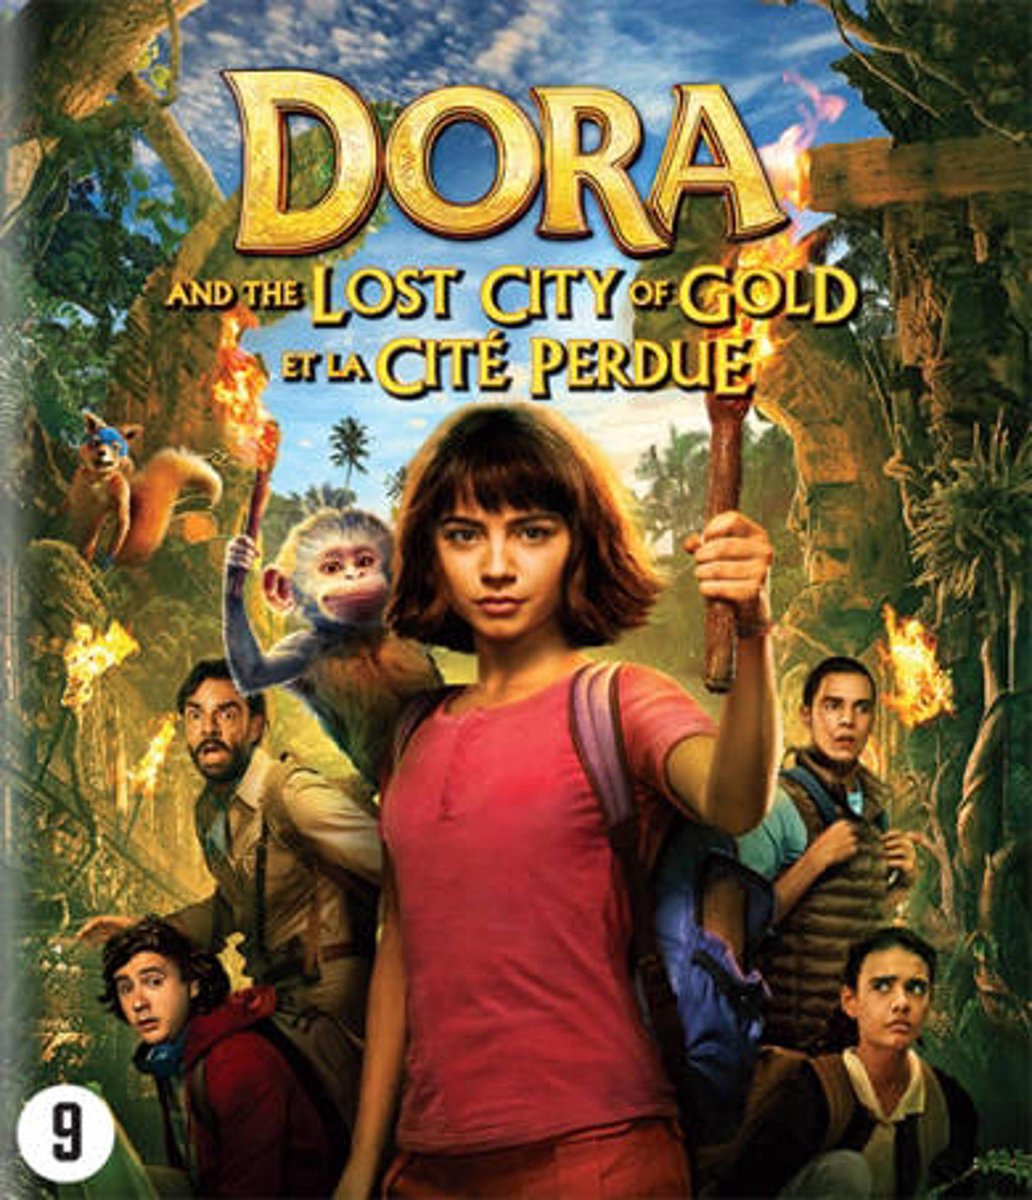 Paramount Dora And The Lost City Of Gold